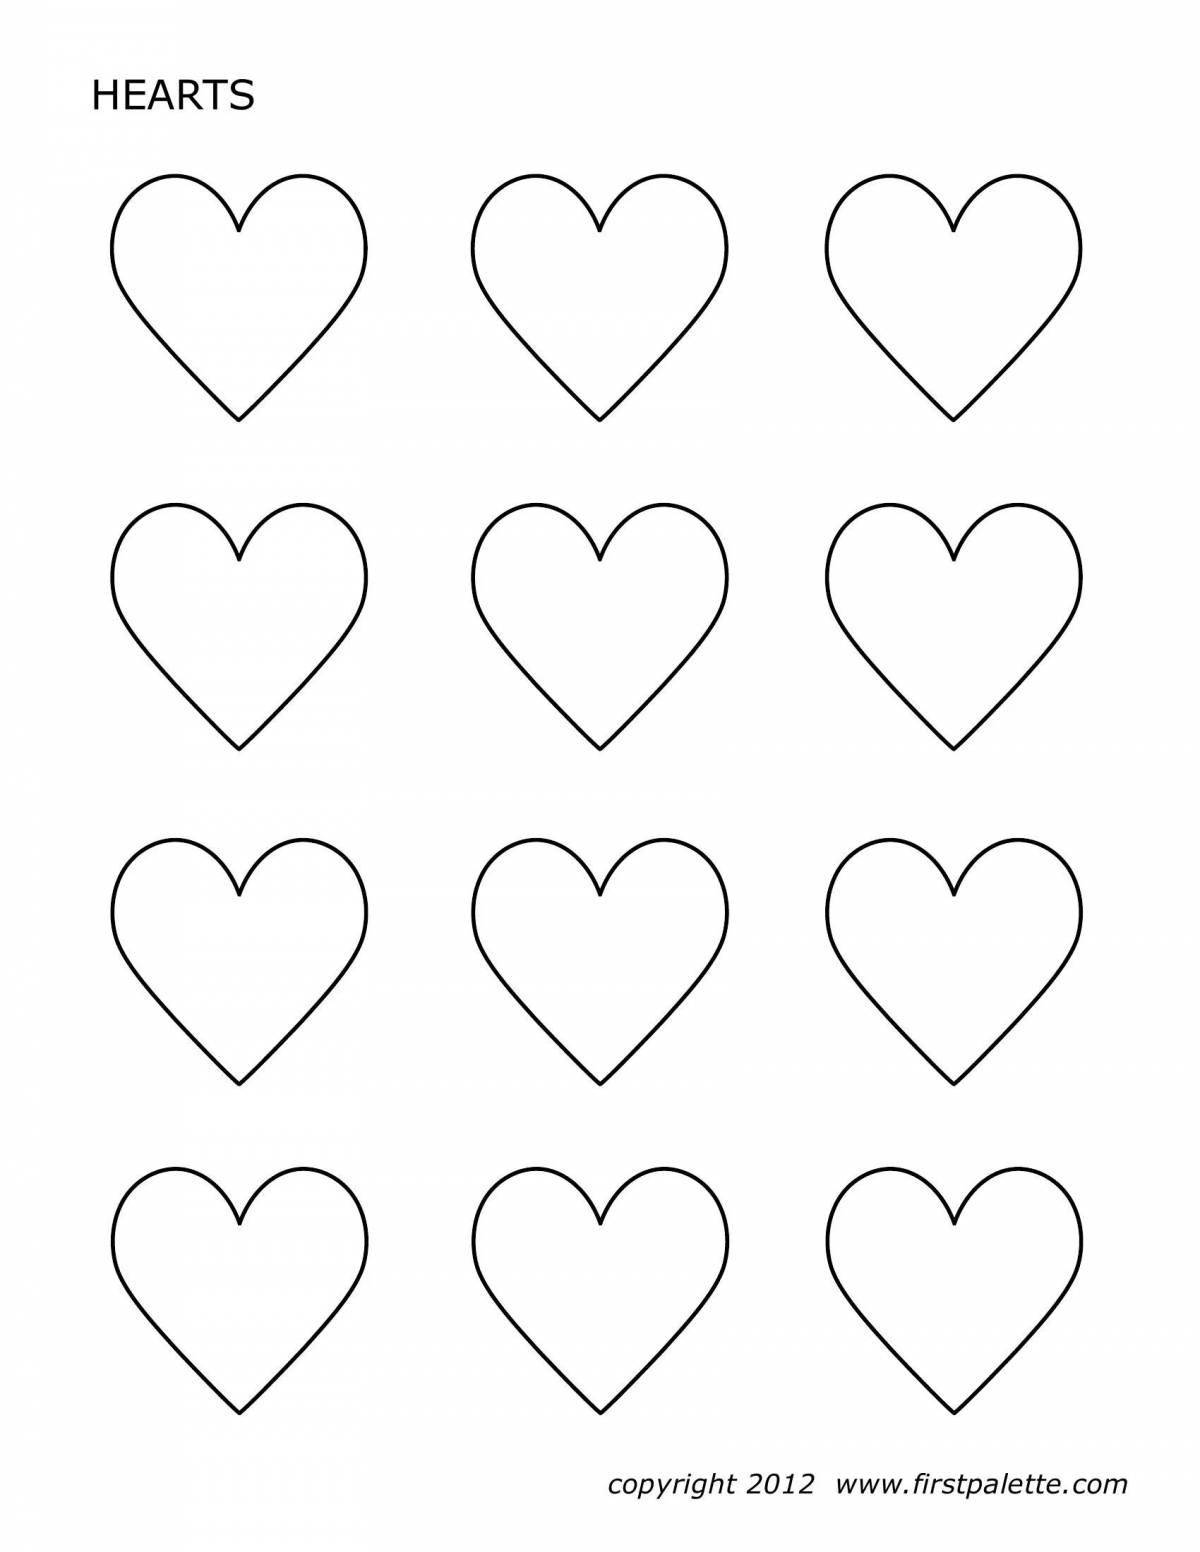 Sparkly little heart coloring page